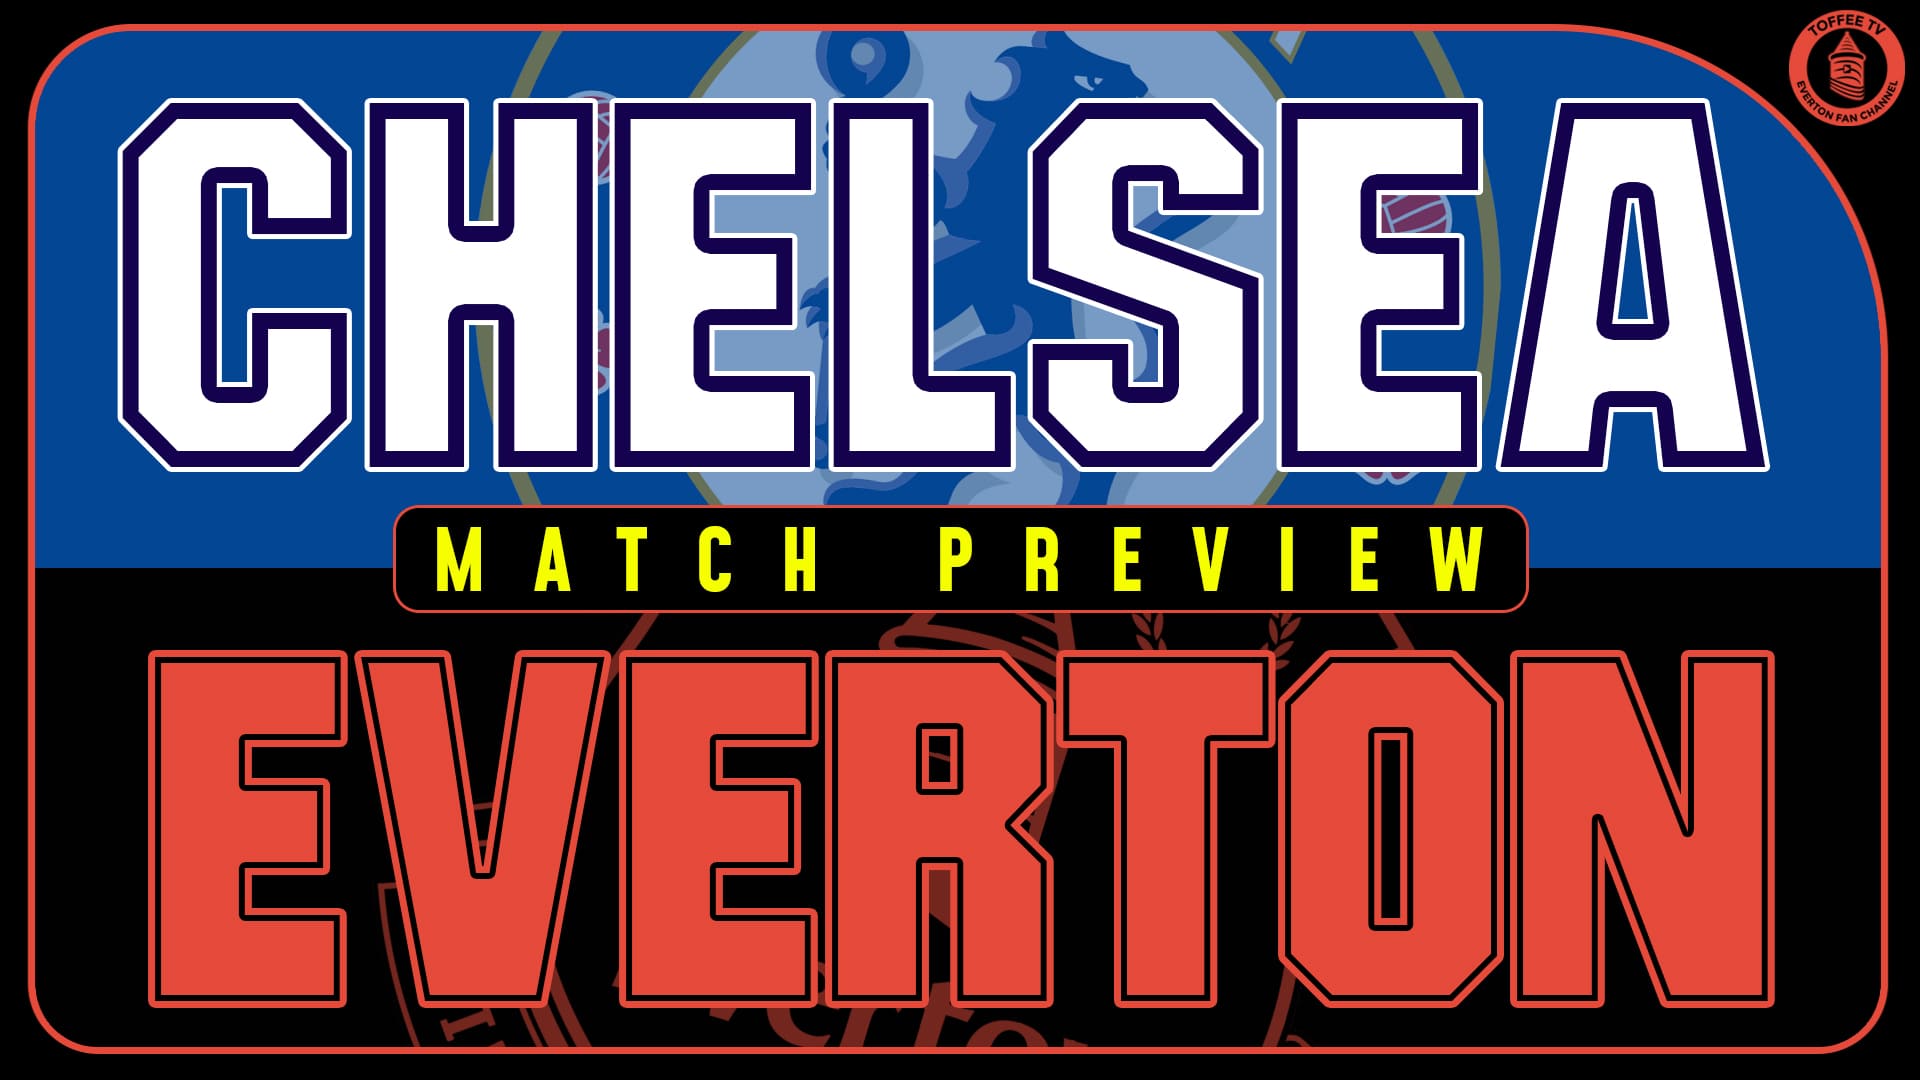 Featured image for “Chelsea V Everton | Match Preview”